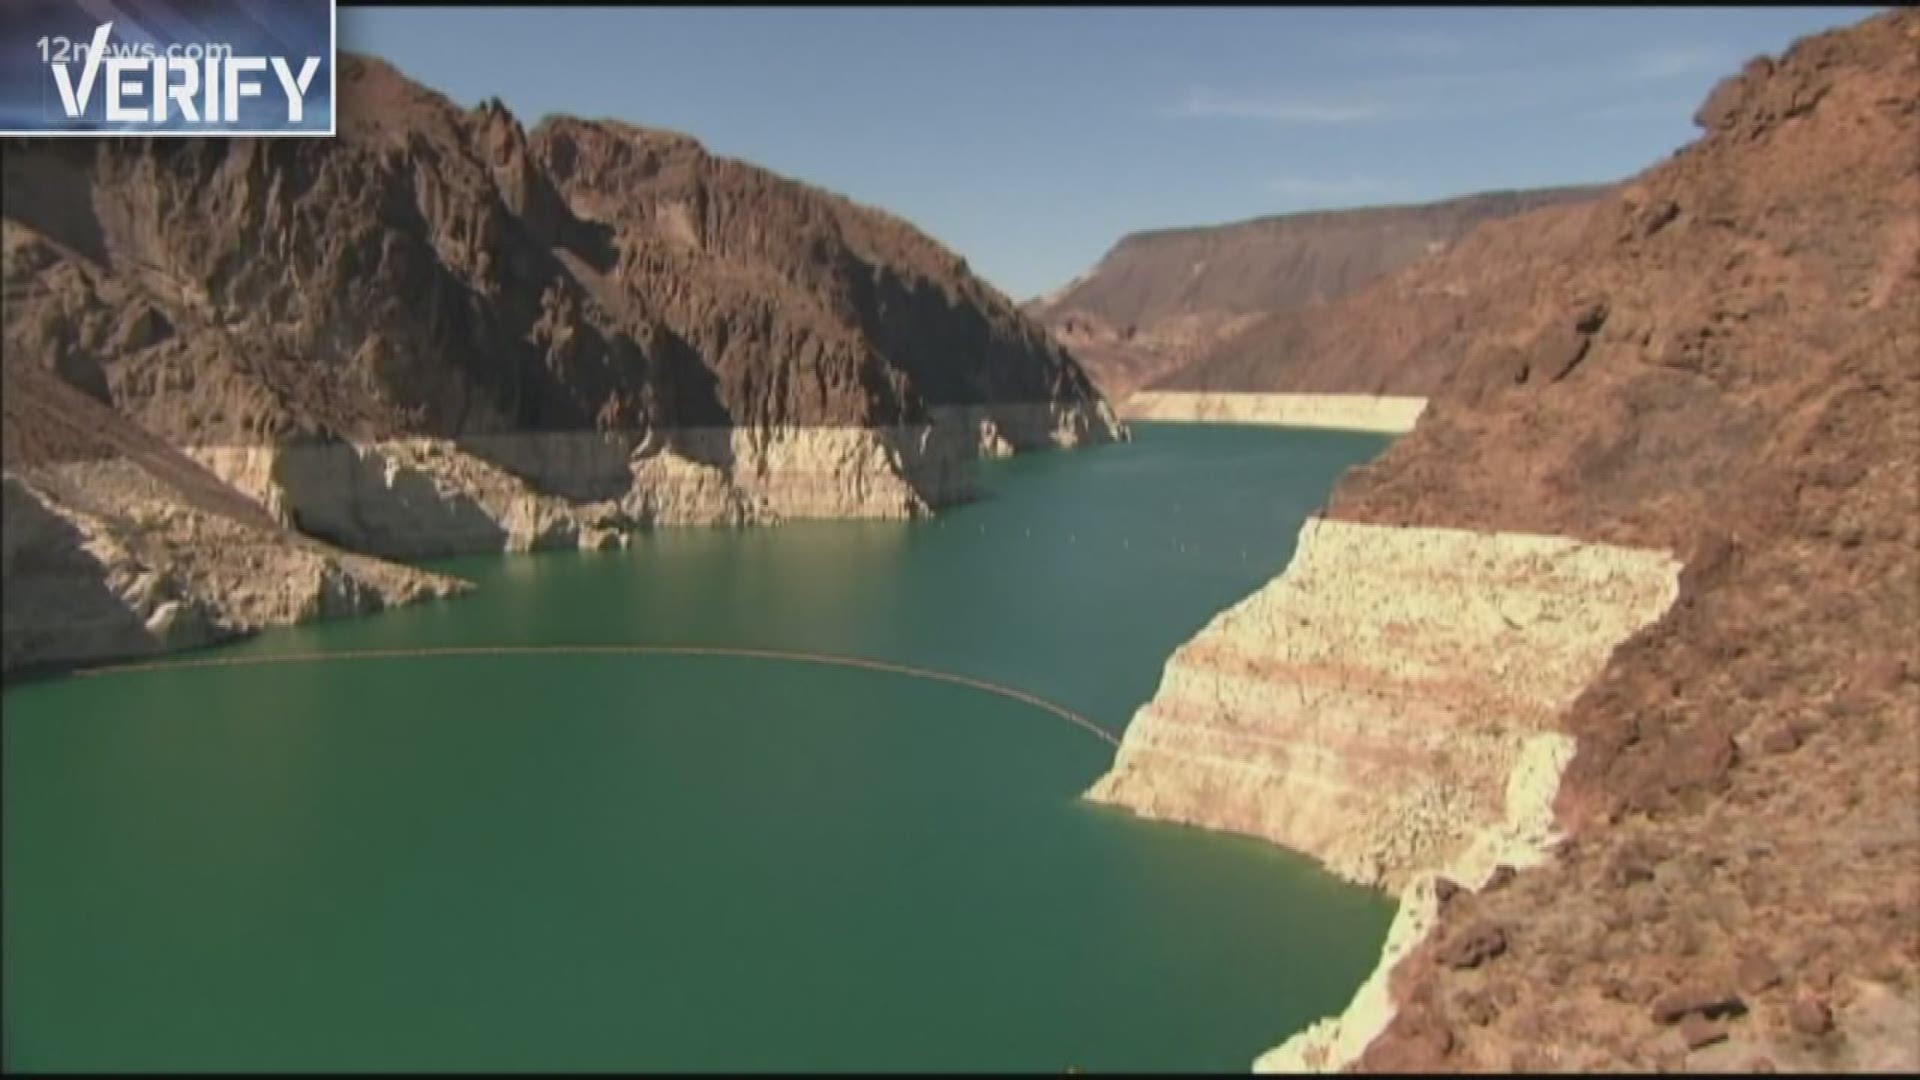 Governor Doug Ducey is saying that Arizona has until January 31st to meet a deadline to come up with a water plan that will protect our water supply. We verify if the deadline is real and what happens if Arizona doesn't come up with a plan.